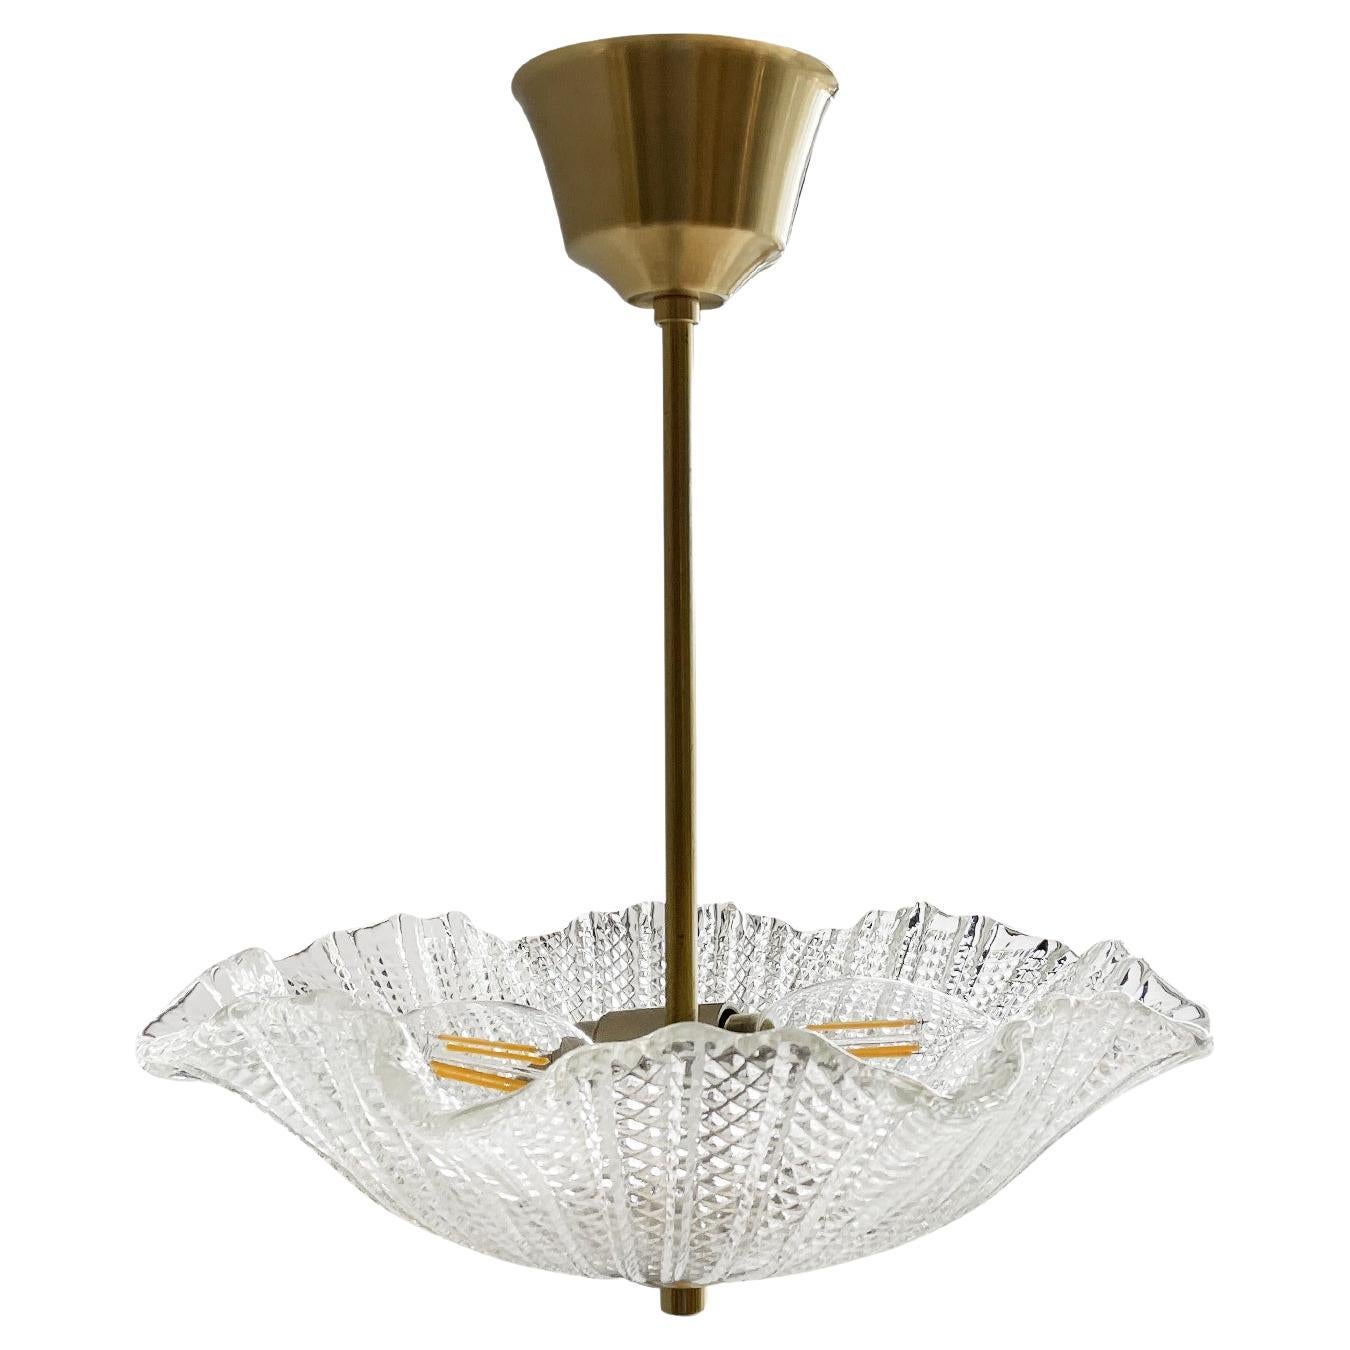 20th Century Swedish Smoked Glass Ceiling Light, Lamp Attributed to Orrefors For Sale